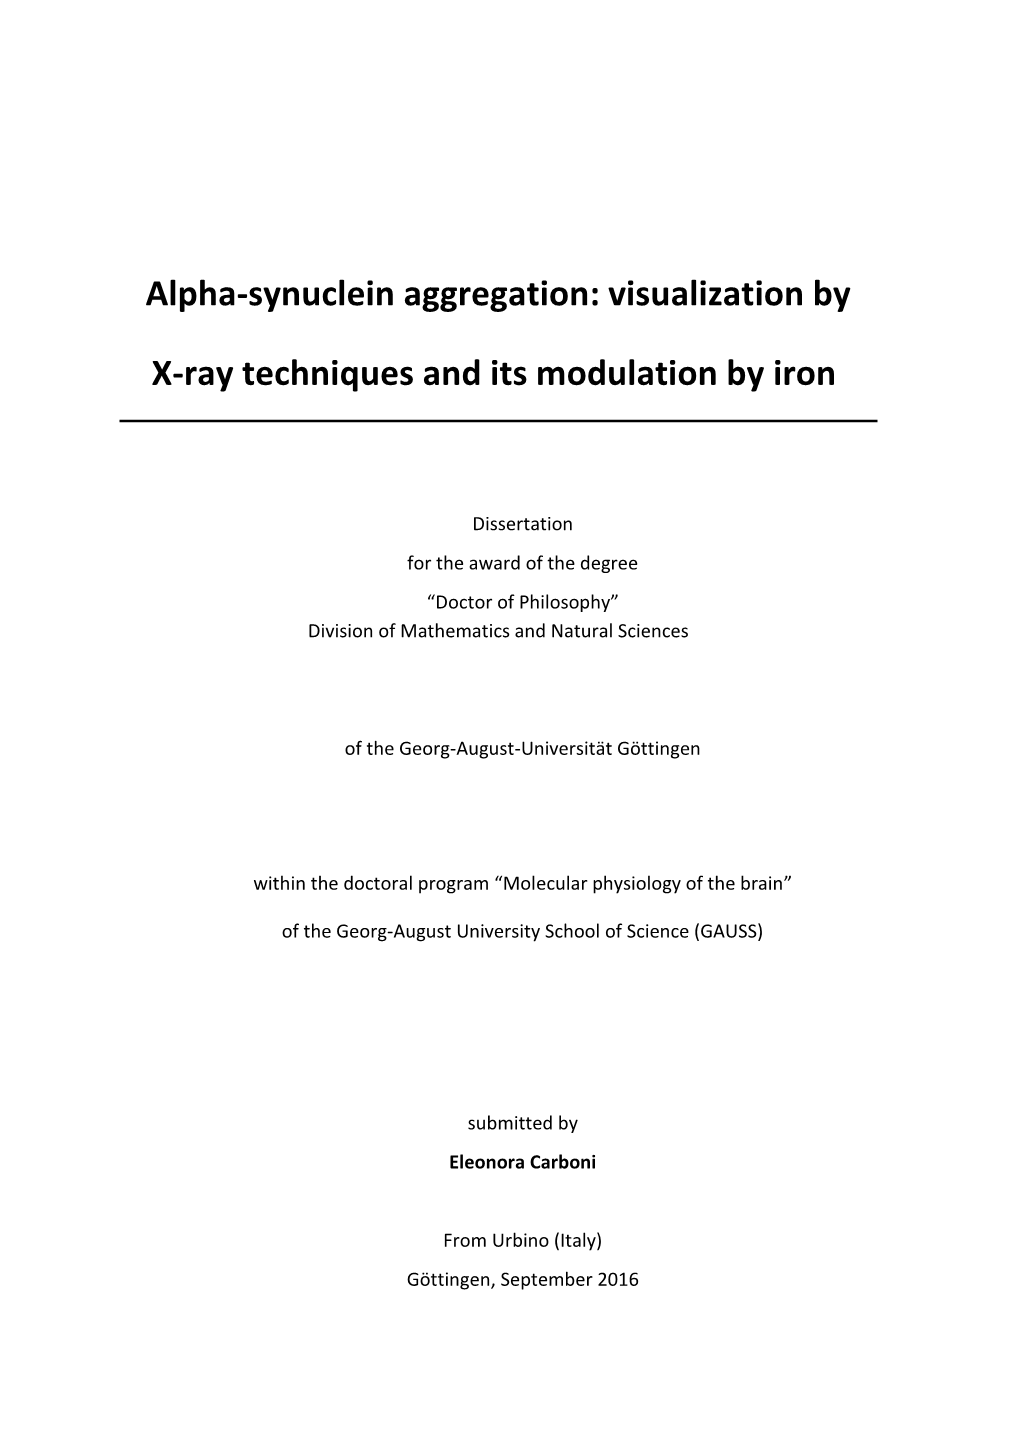 Alpha-Synuclein Aggregation: Visualization by X-Ray